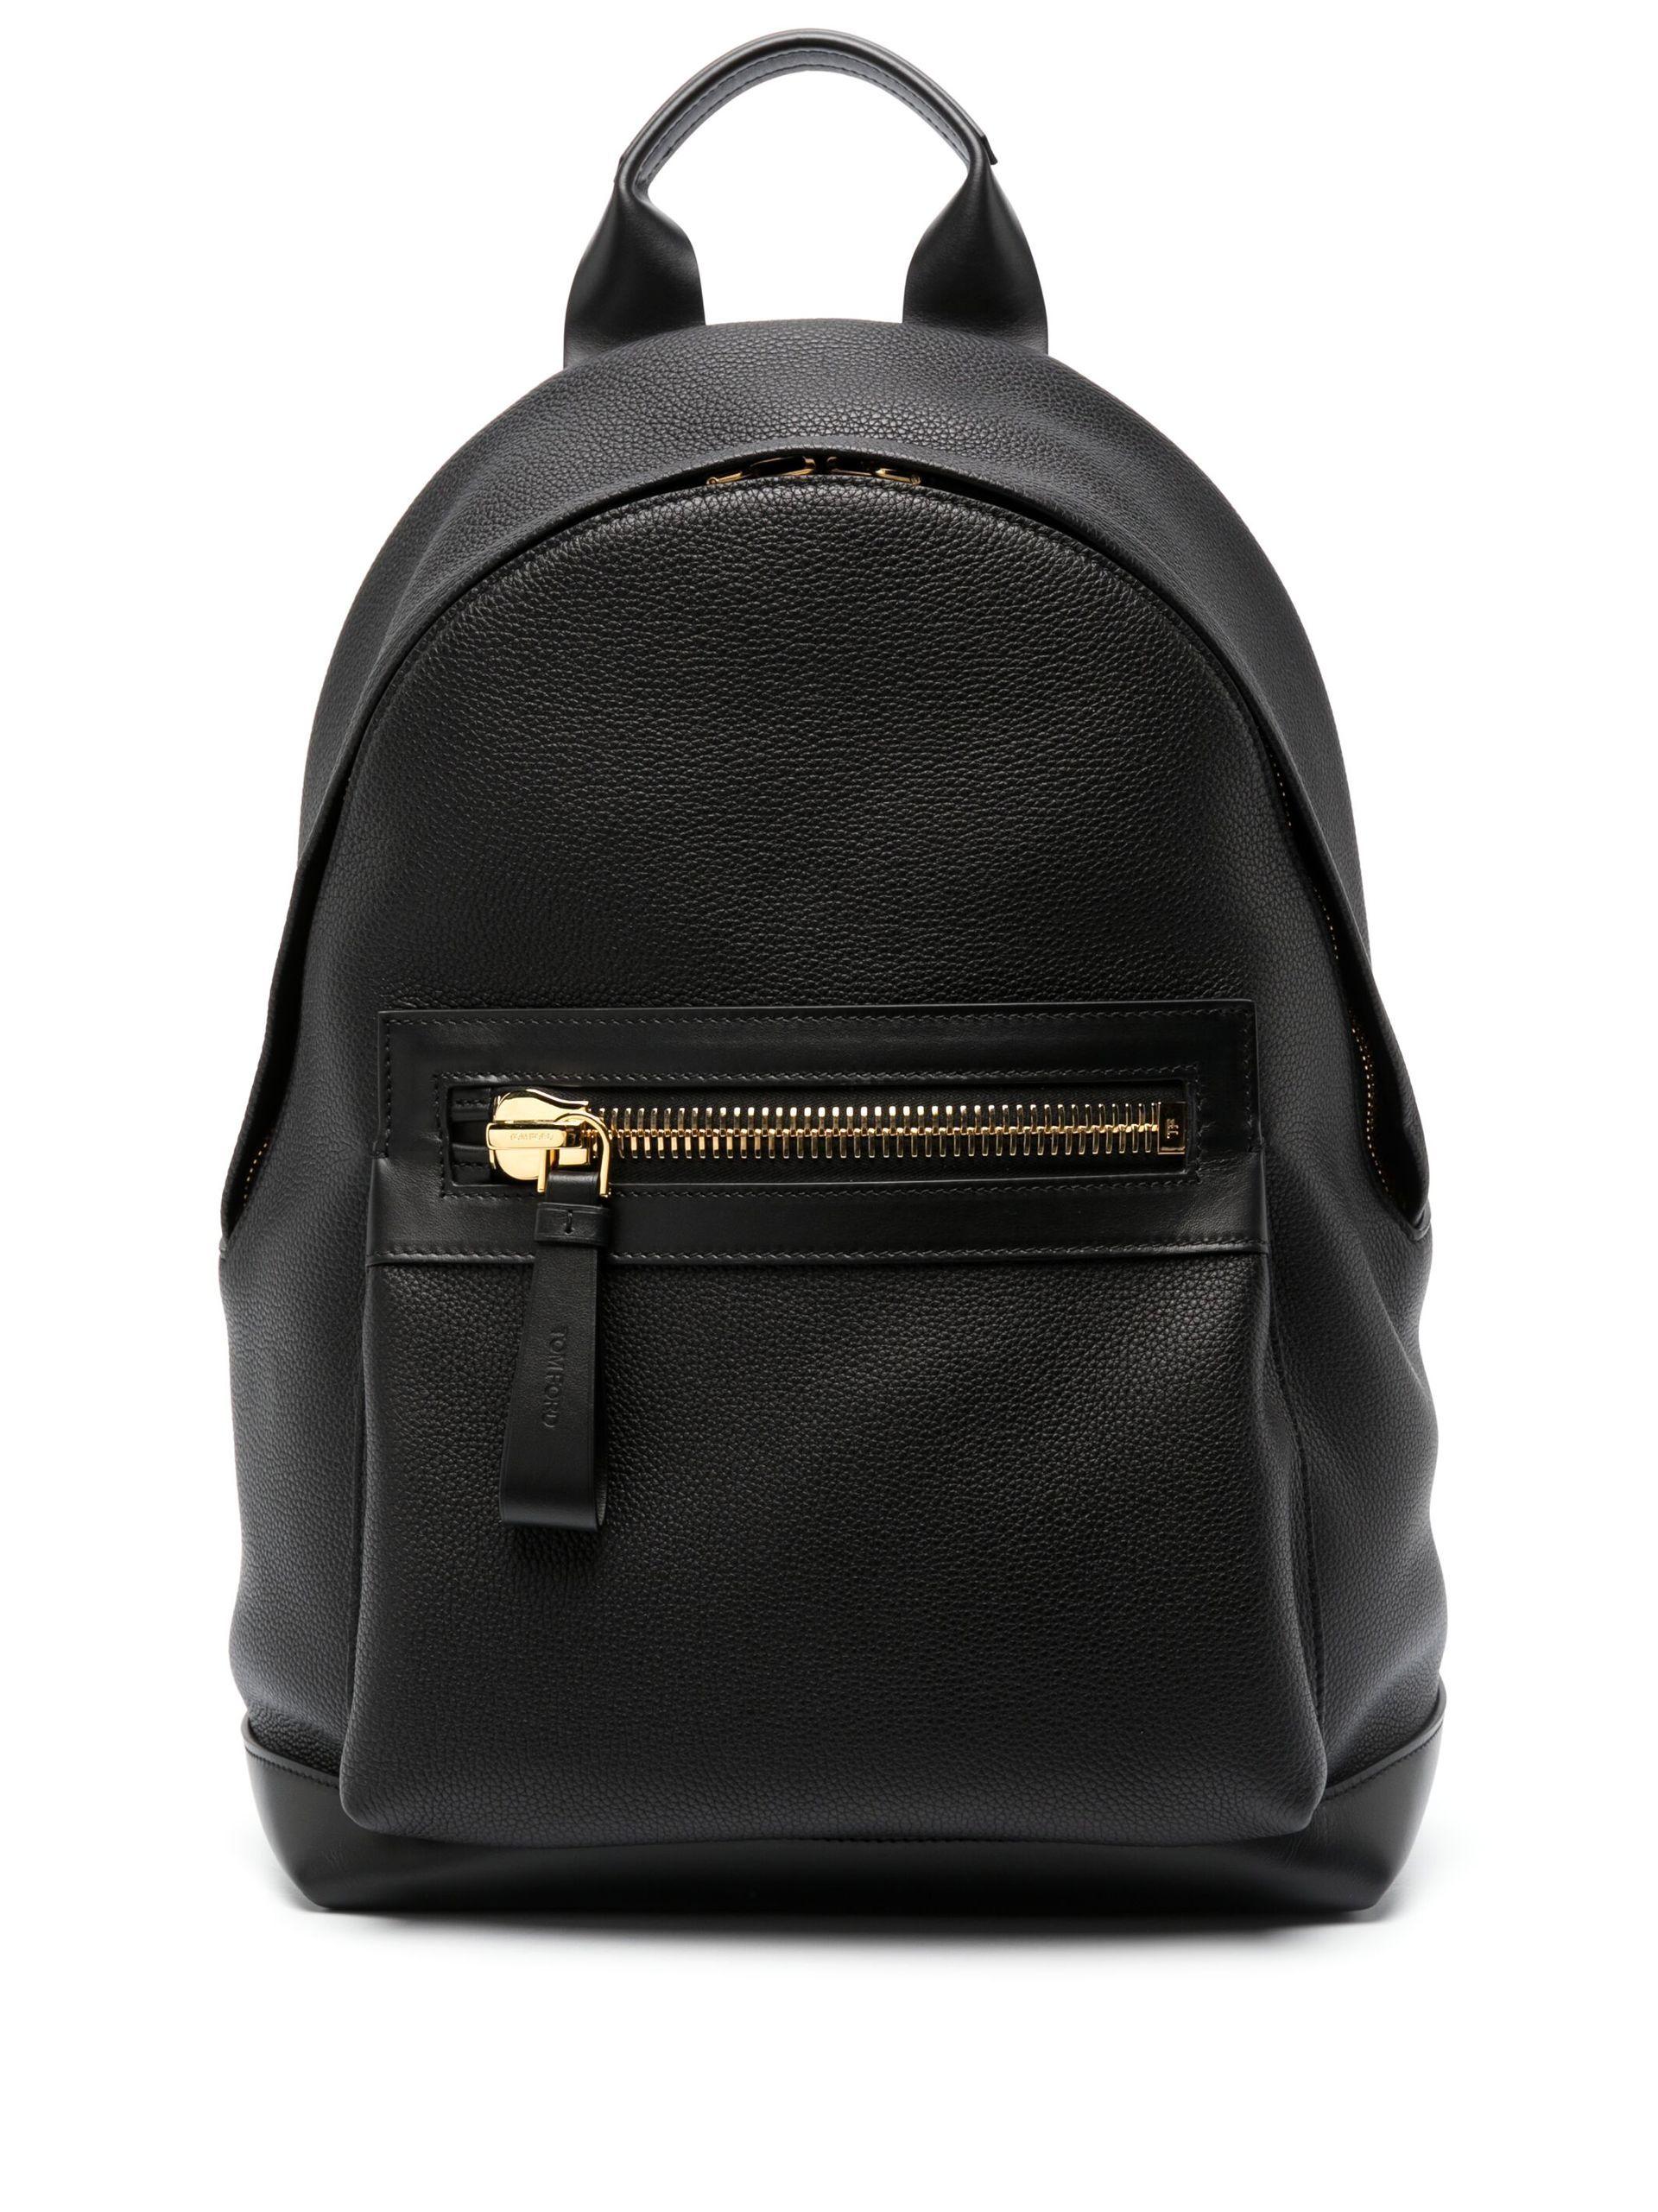 Tom Ford Buckley Grained Leather Backpack in Black for Men | Lyst